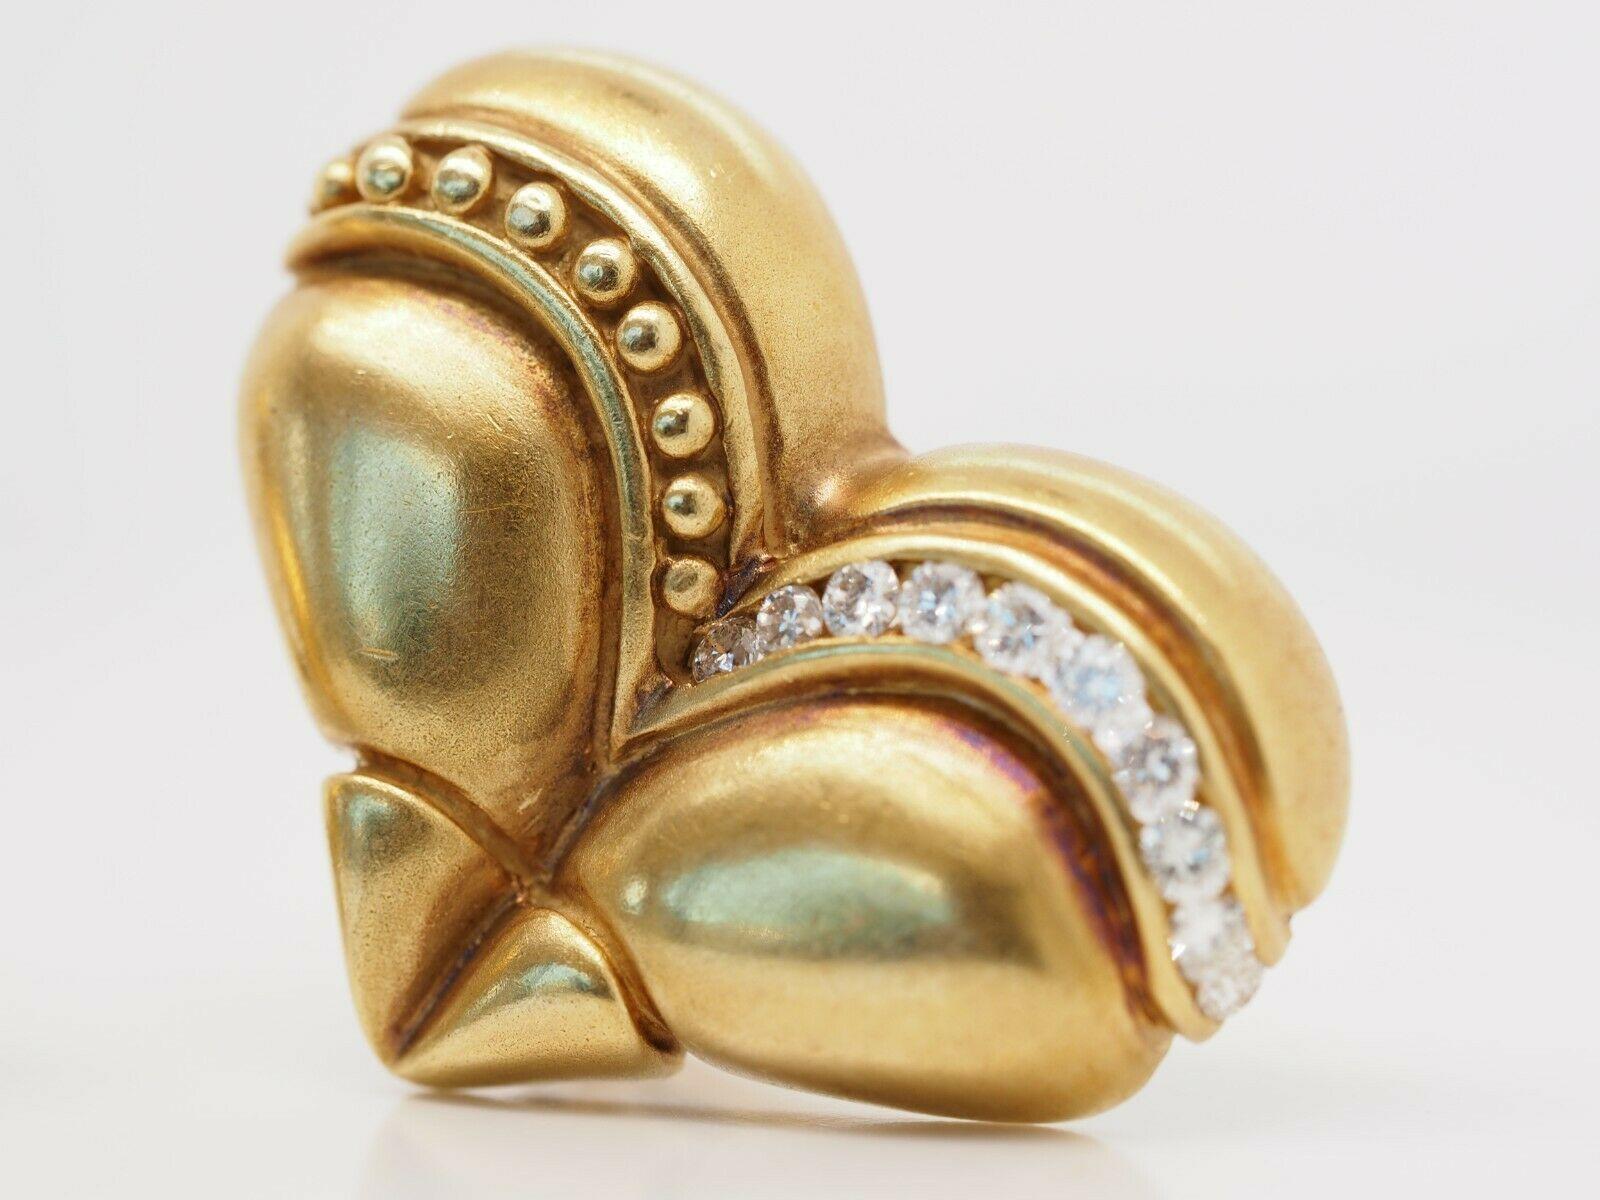 Pictured is an adorable pair of vintage 18 karat clip on heart earrings. The earrings have a formation of 18 karat beads and diamond detailing on the arches of the hearts. On the backside there is a 